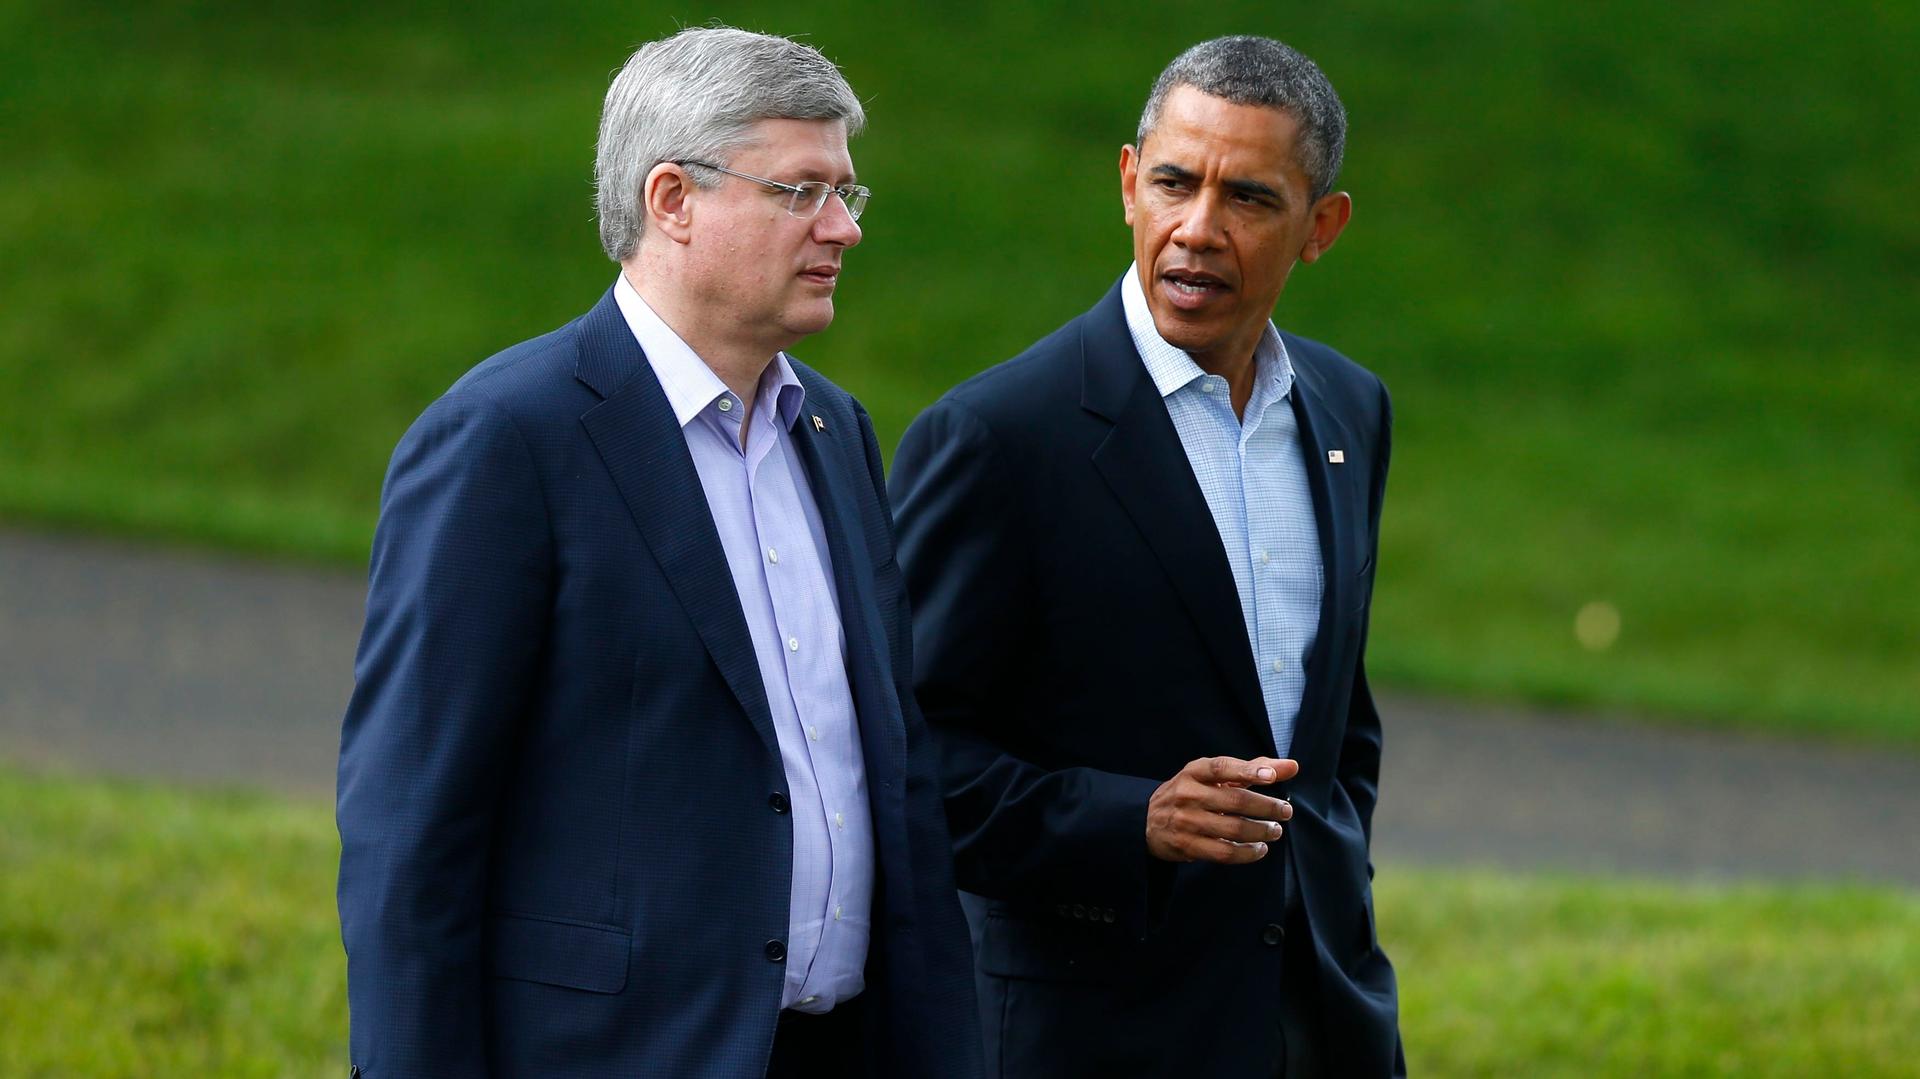 The former Canadian PM and Obama 